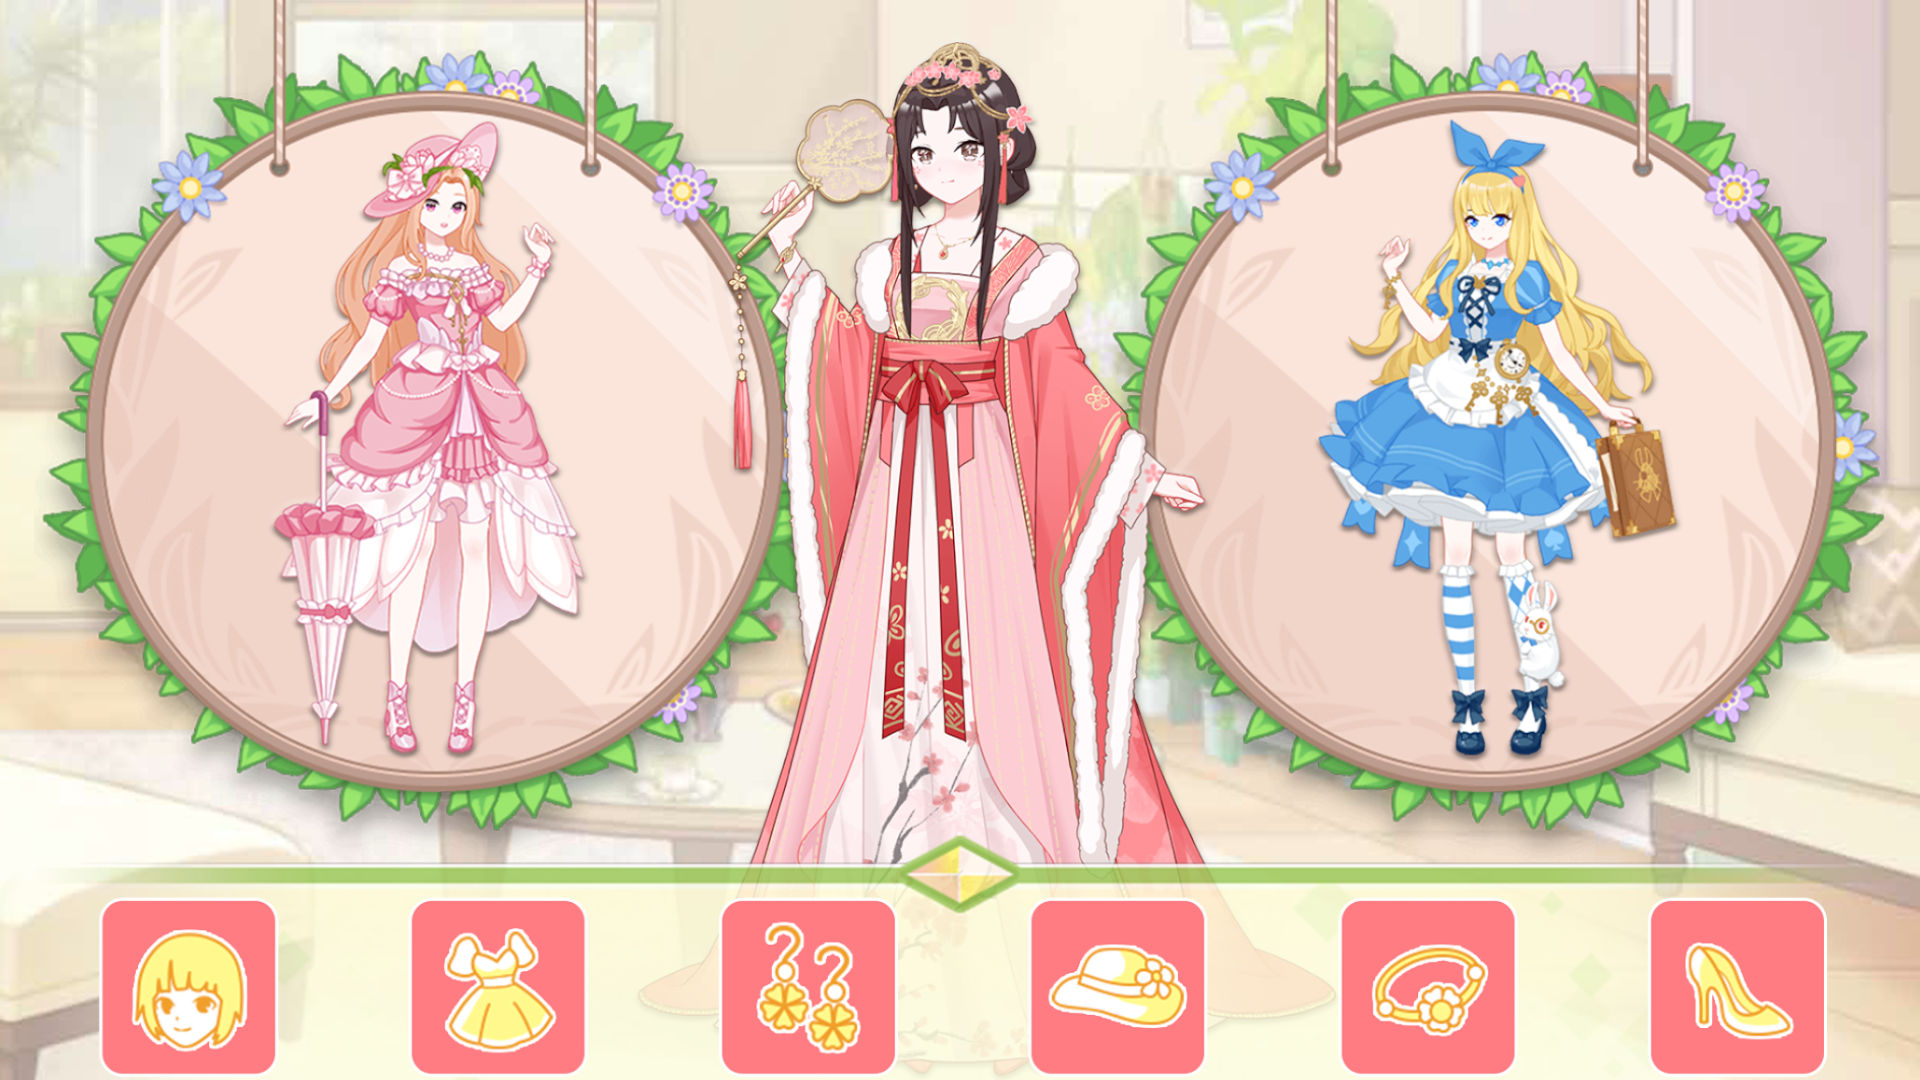 Three screenshots of characters from the Batdoll dress up game